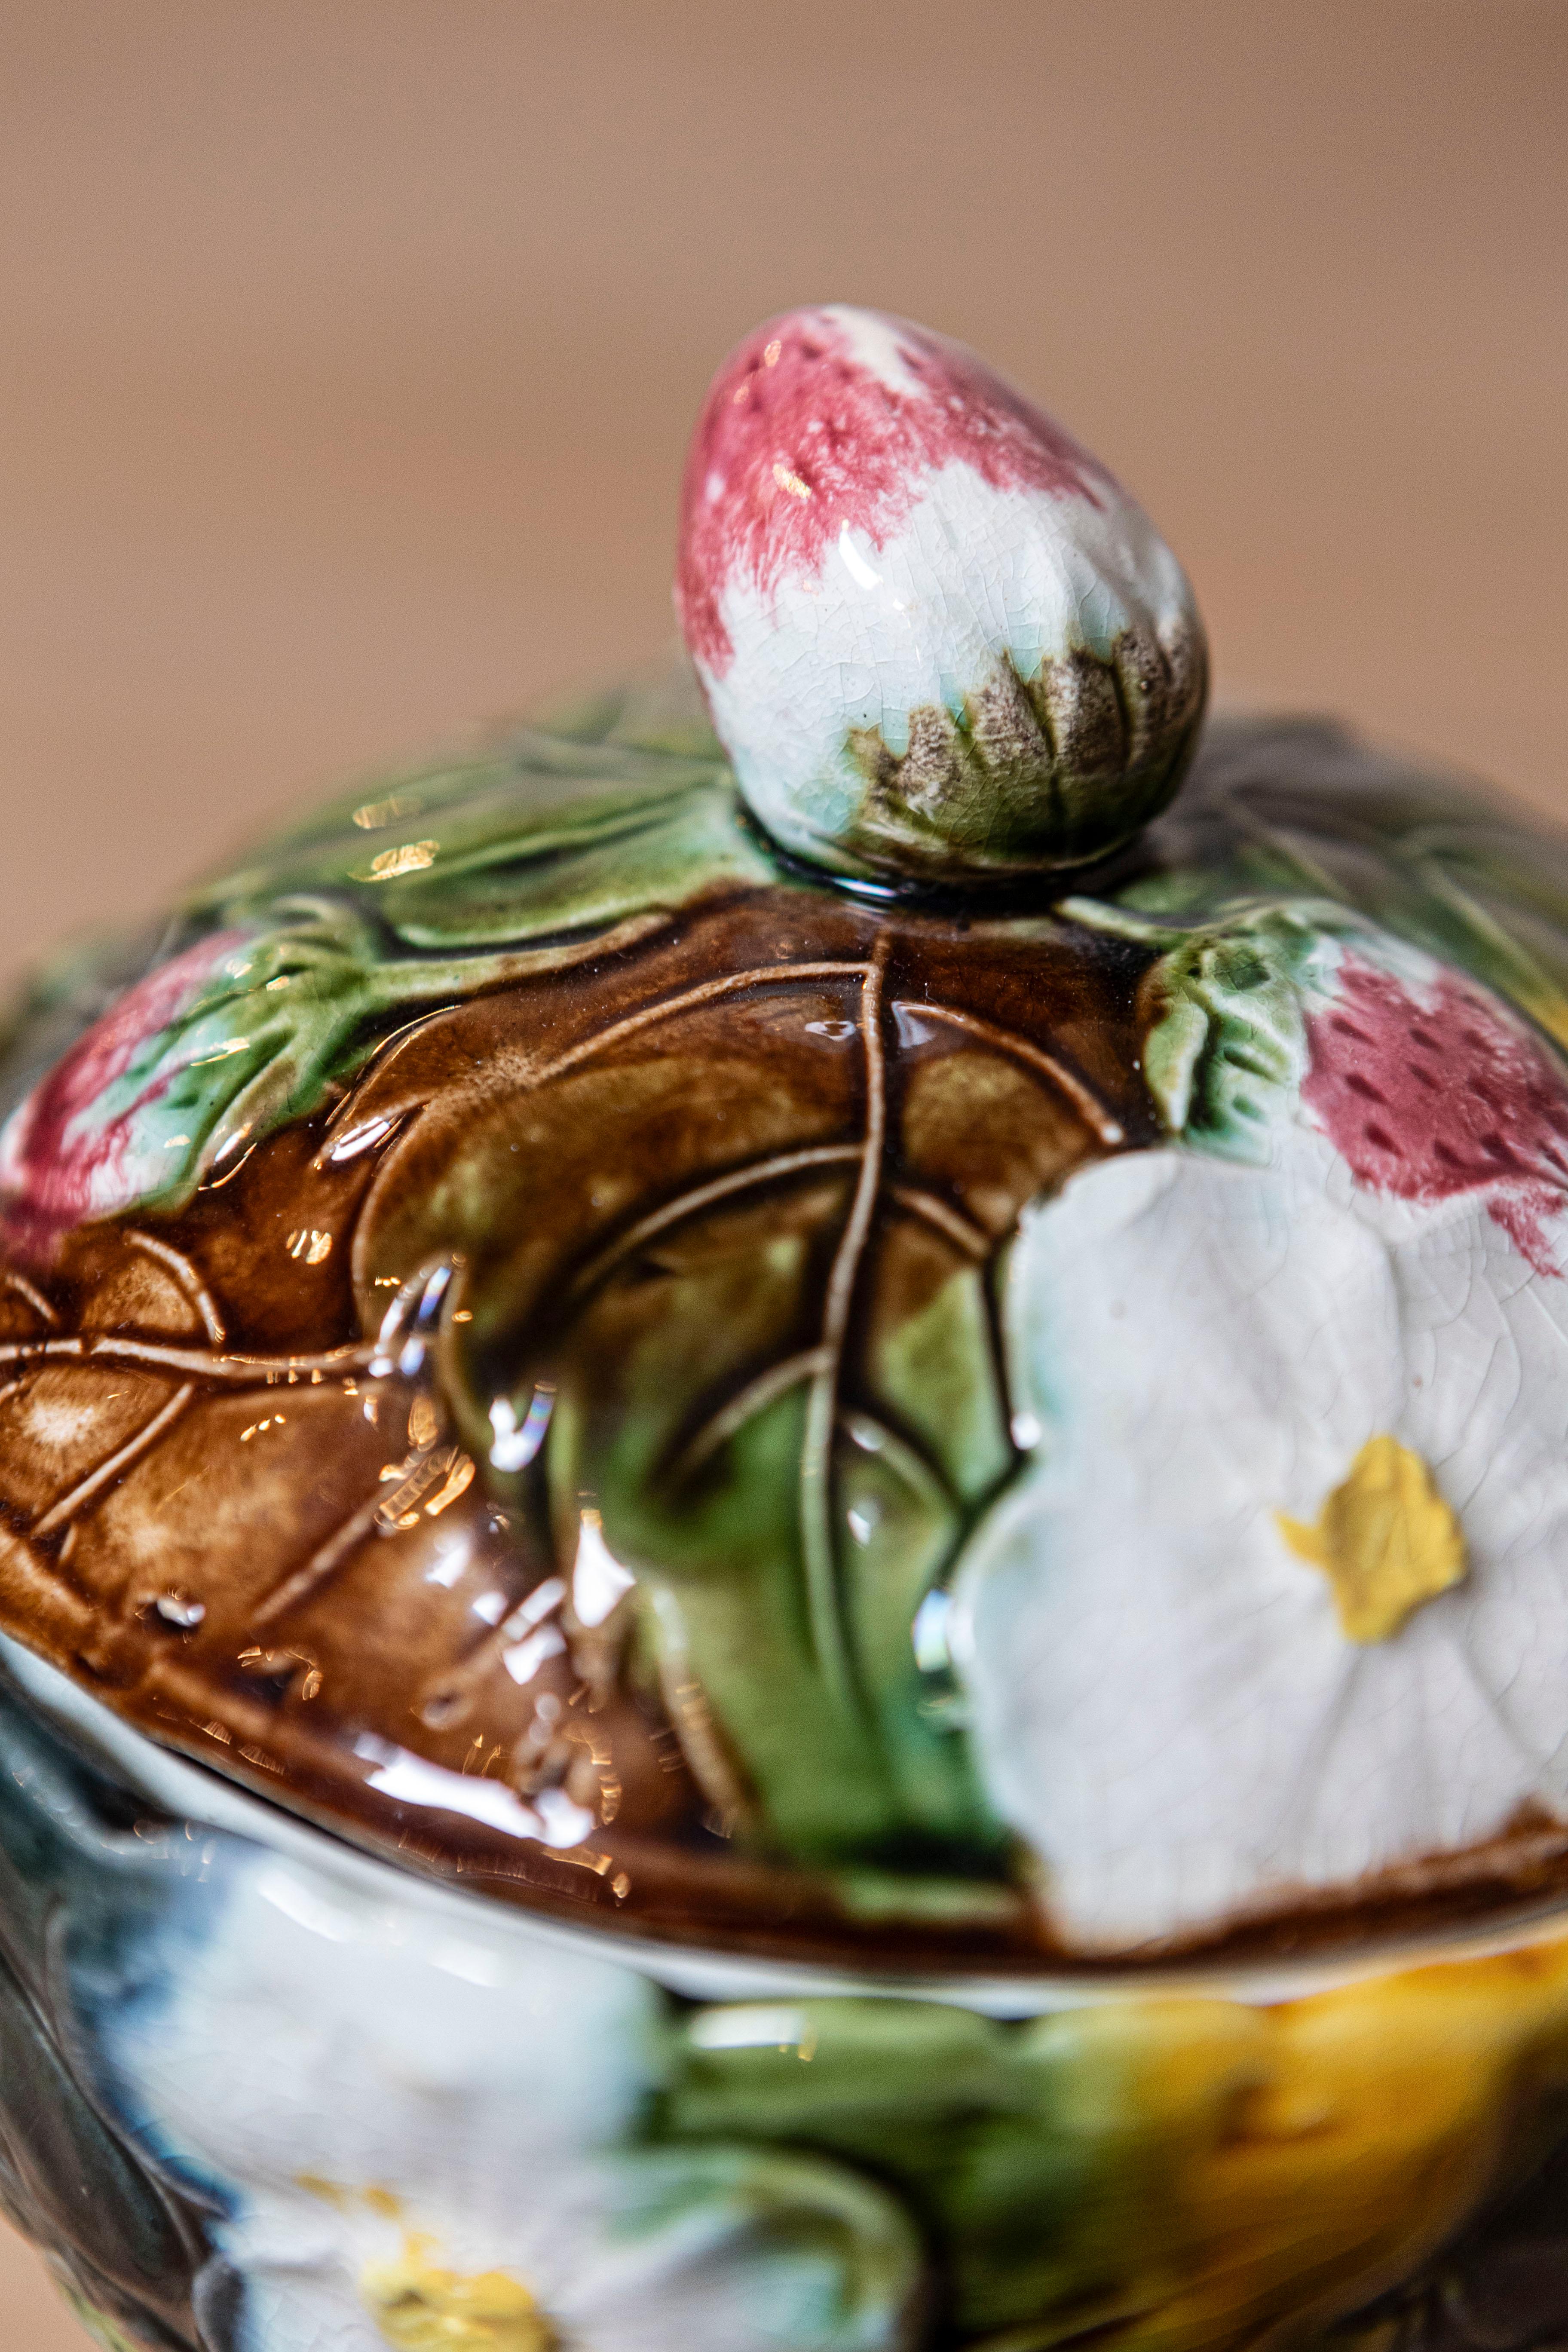 French 19th Century Lidded Majolica Strawberry Bowl with Flowers and Foliage For Sale 3